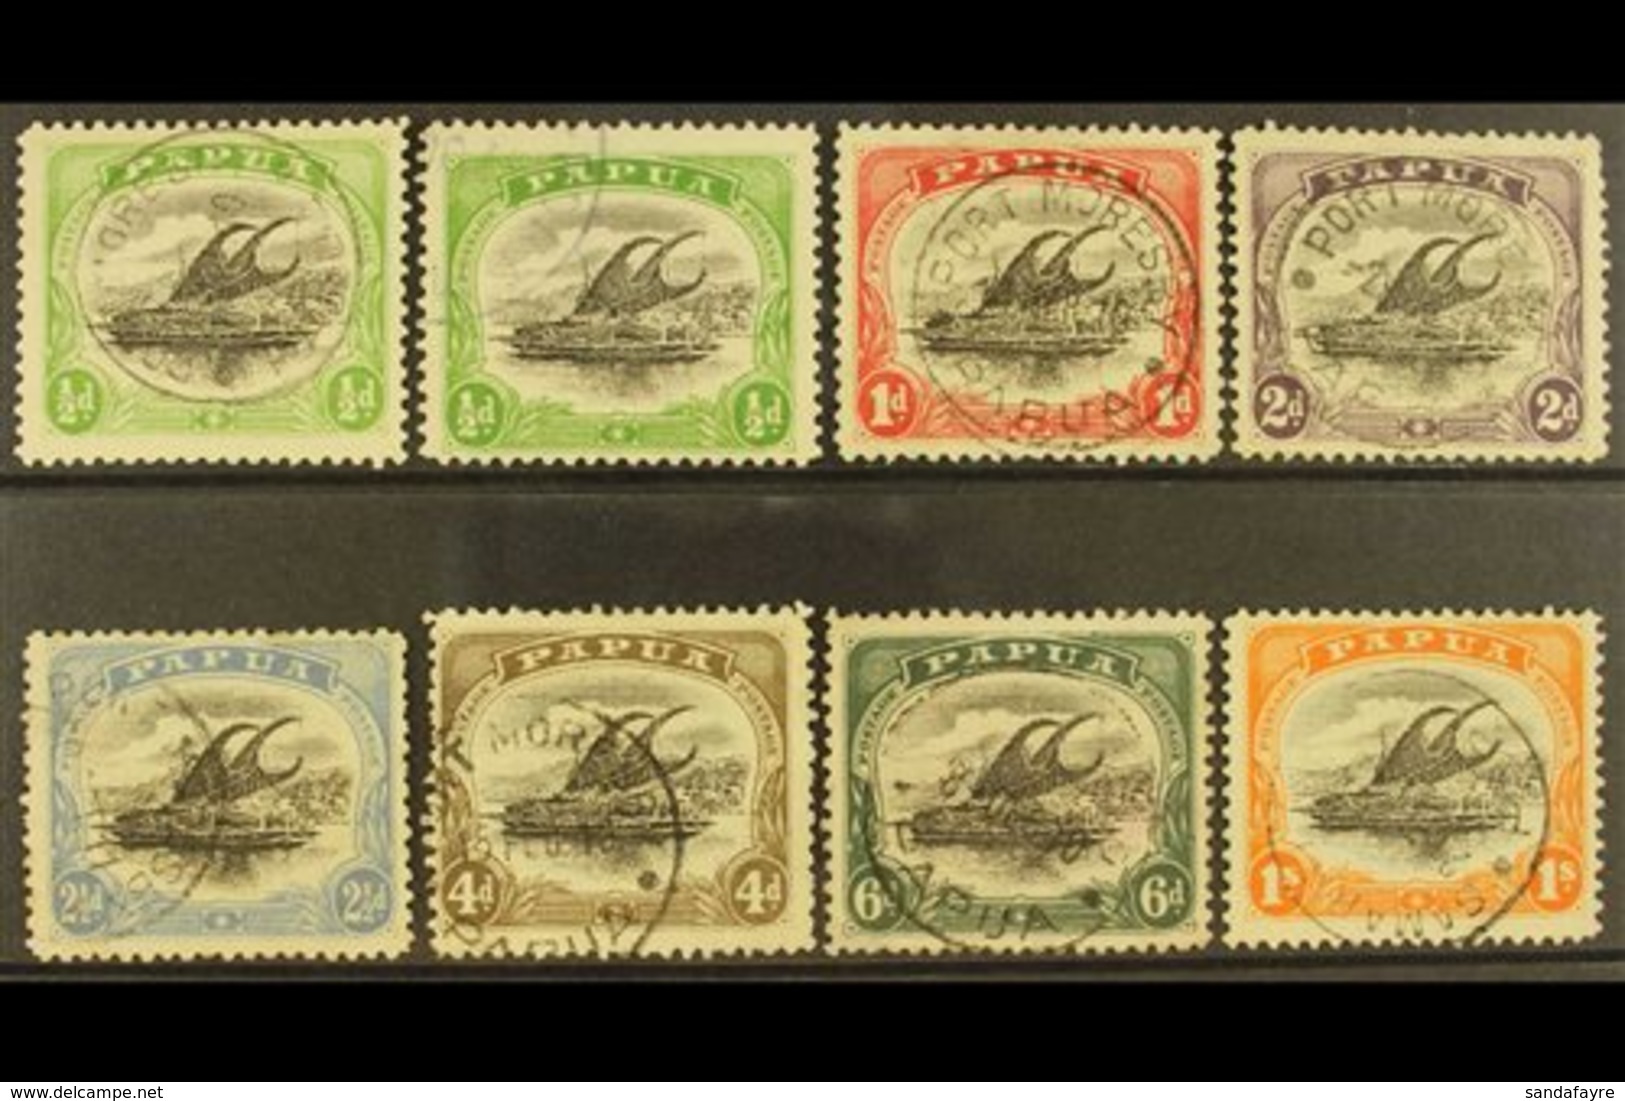 1909-10  Lakatoi Watermark Sideways, Perf 11 Set With Both ½d Shades, SG 59/65, Fine Cds Used. (8) For More Images, Plea - Papua New Guinea